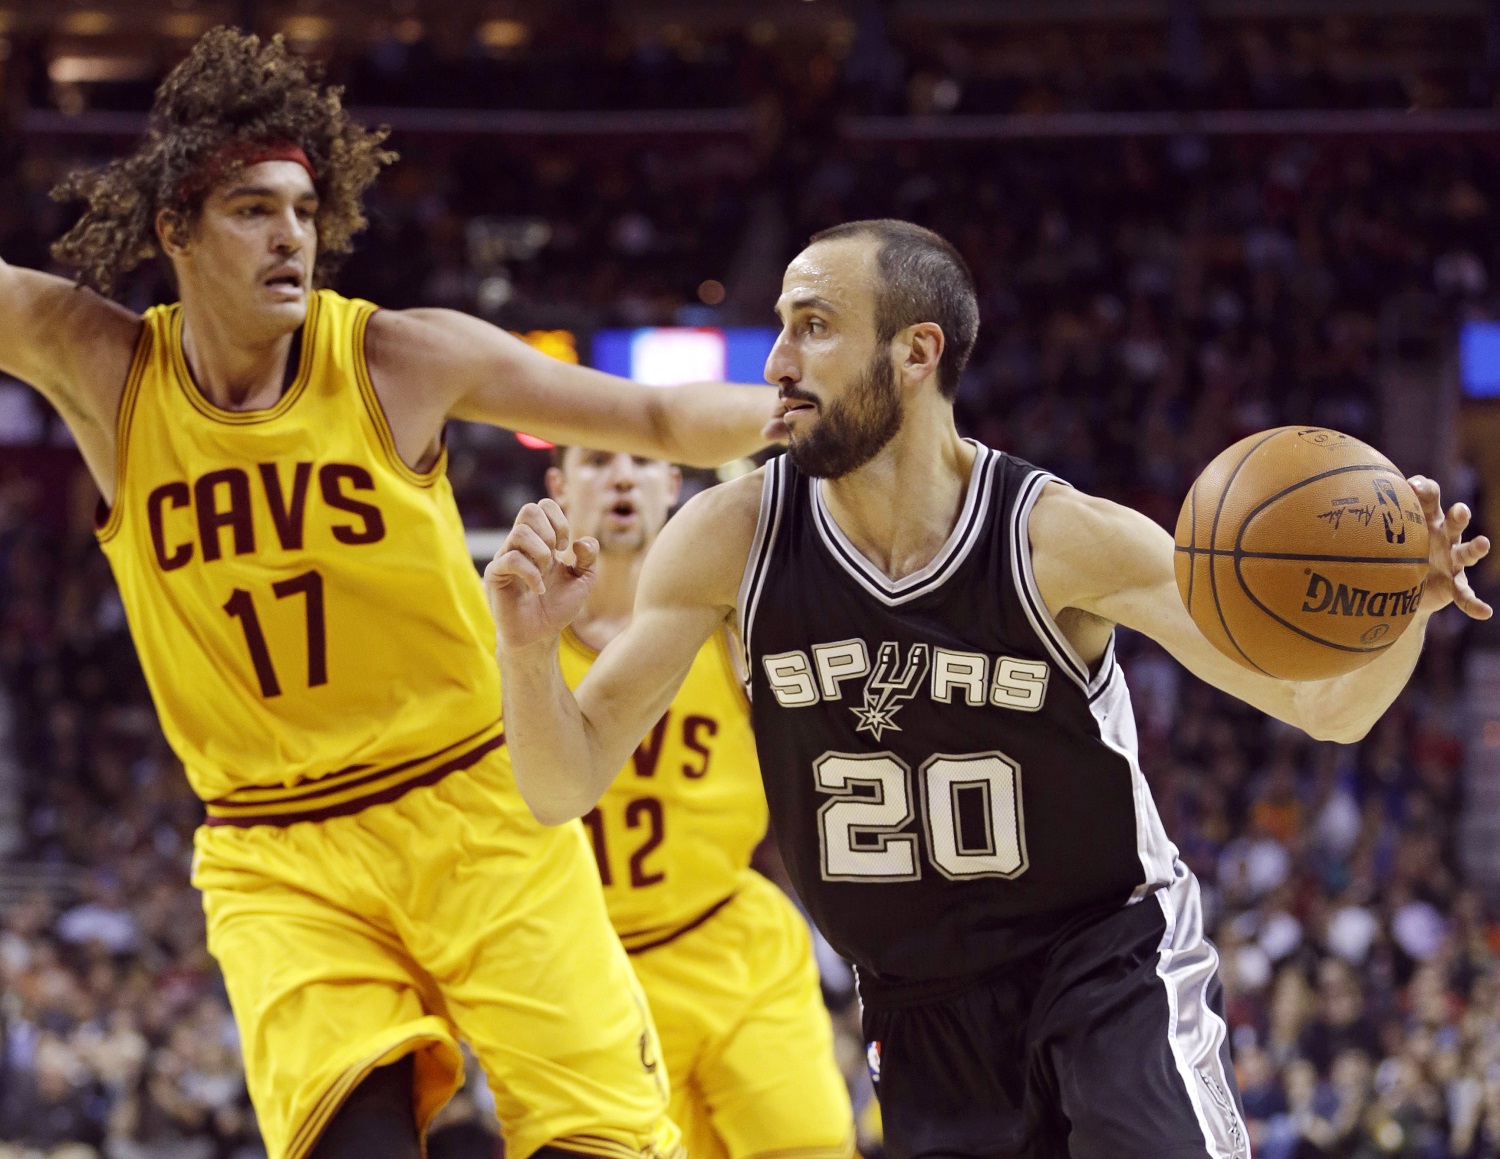 San Antonio Spurs' Manu Ginobili (20), from Argentina, drives past Cleveland Cavaliers' Anderson Varejao (17), from Brazil, during an NBA basketball game Wednesday, Nov. 19, 2014, in Cleveland. (AP Photo/Tony Dejak)